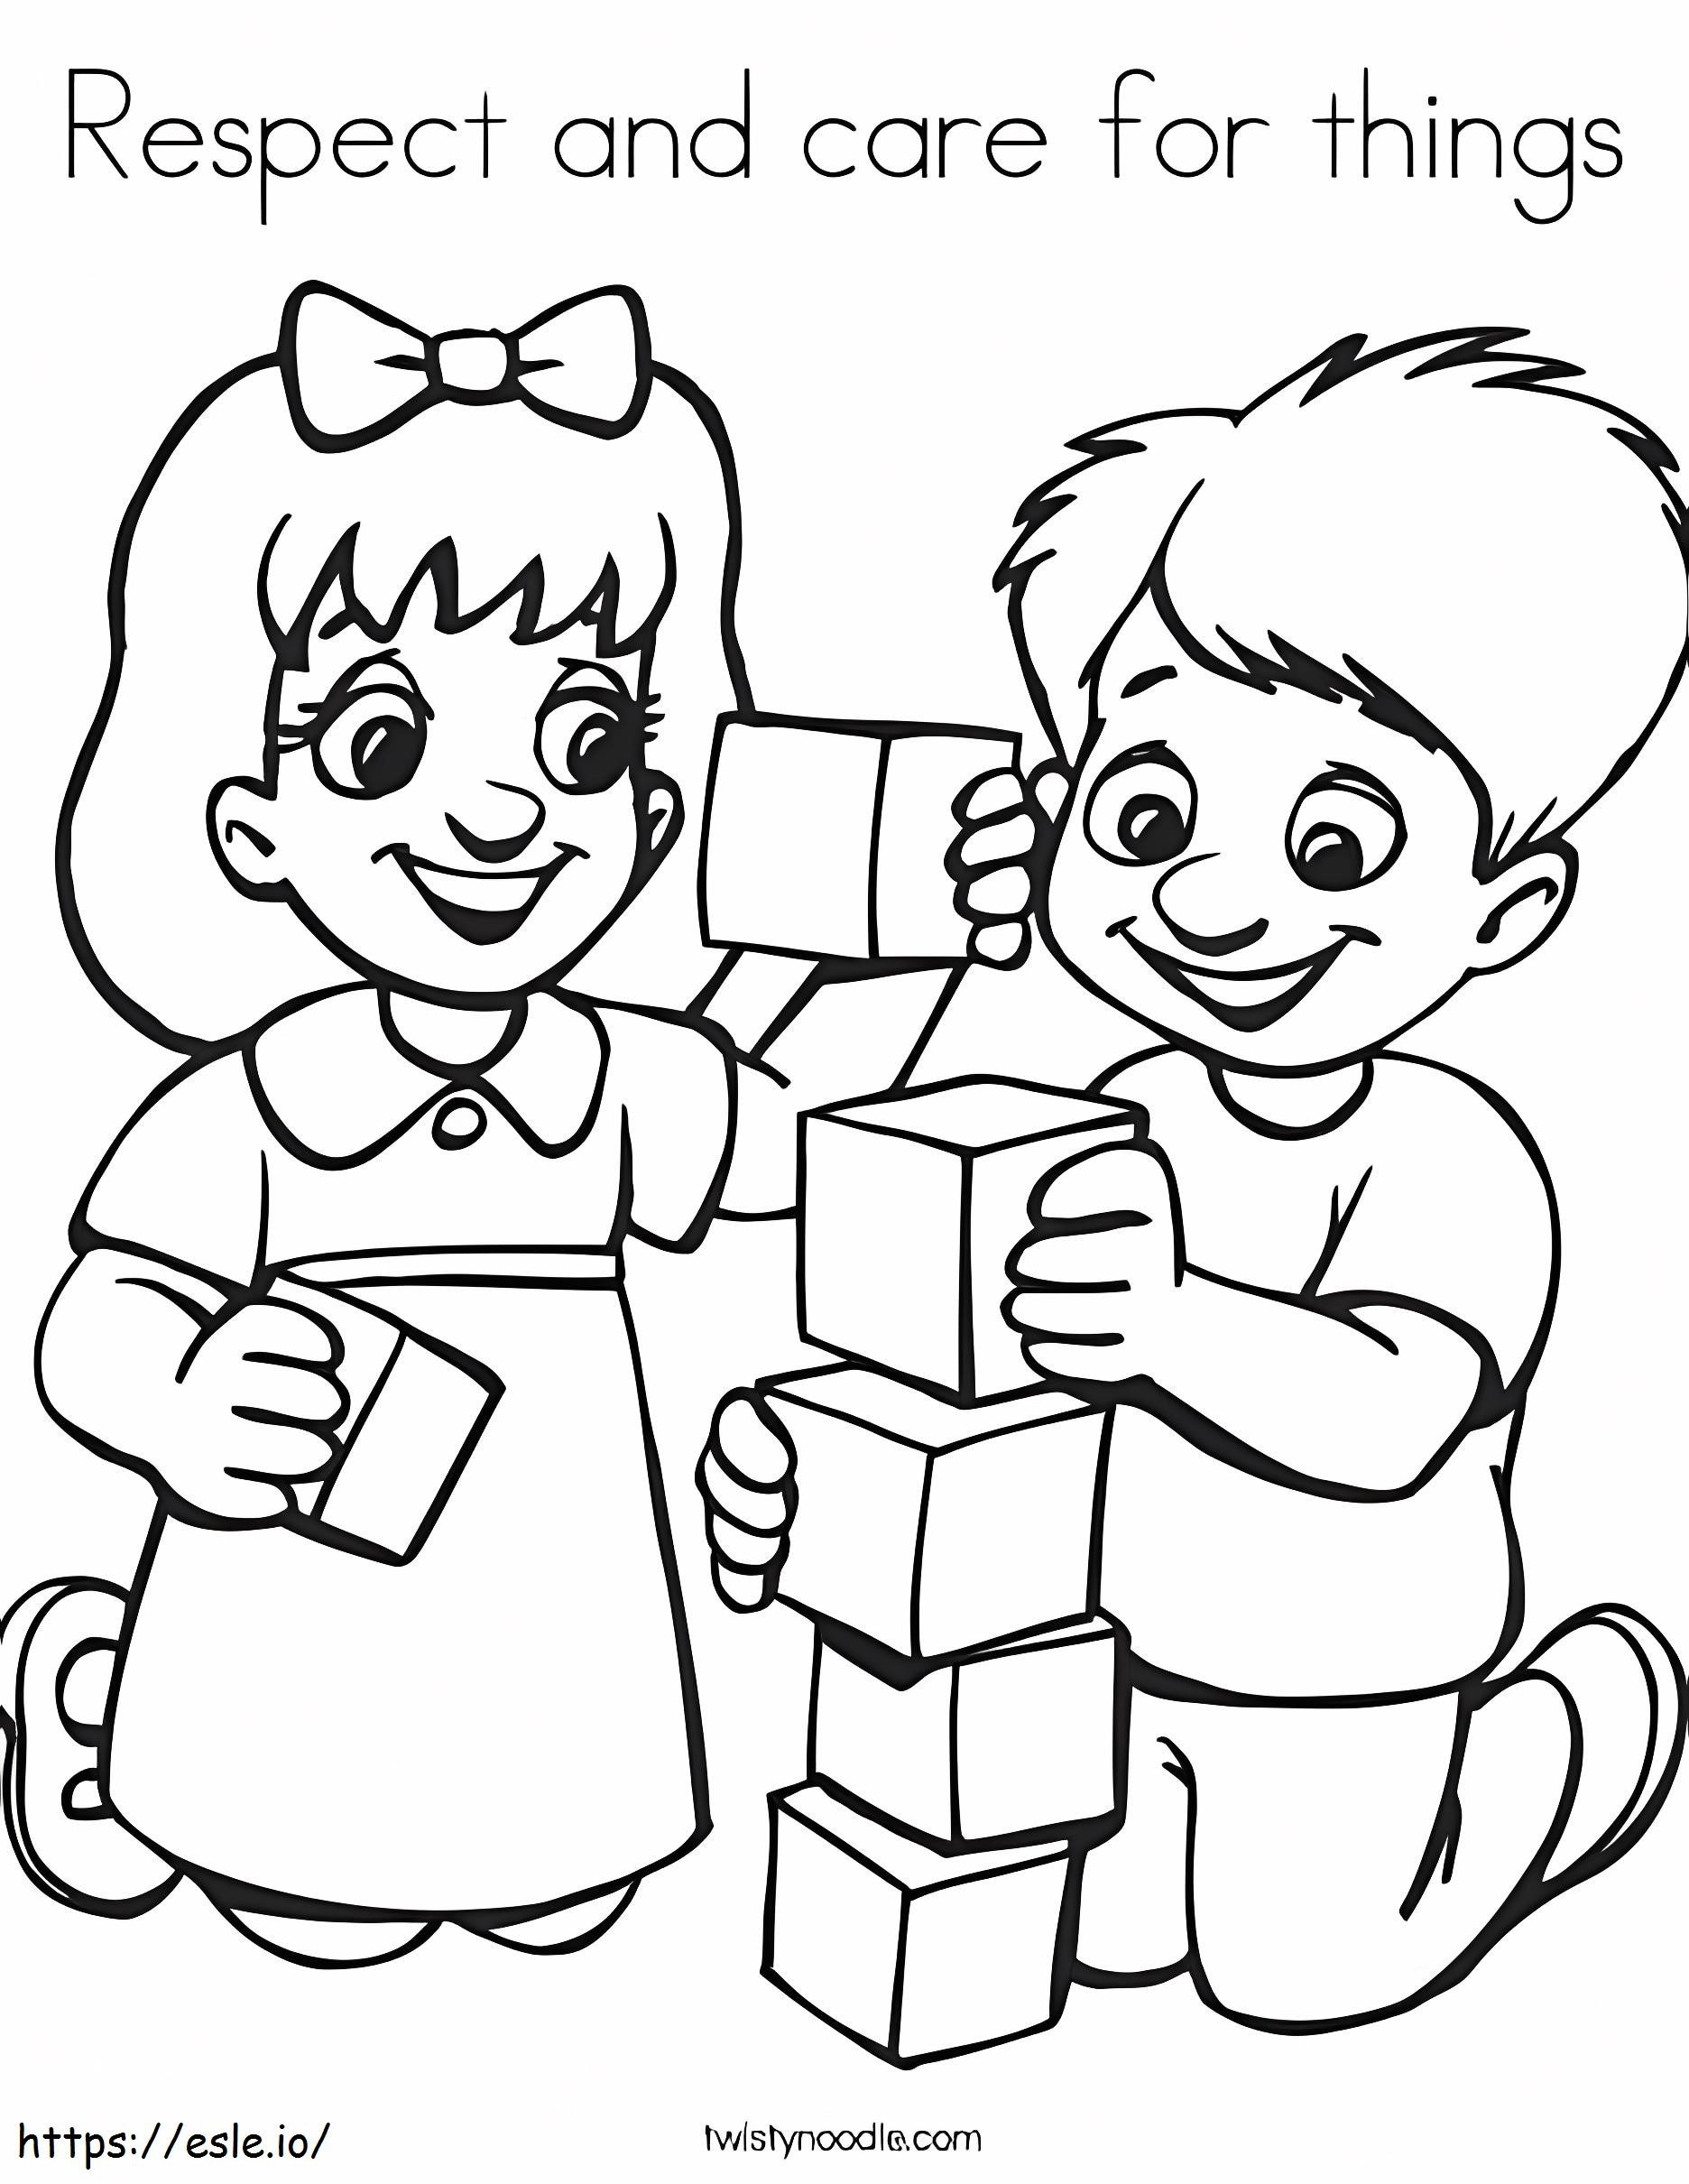 Respect And Care For Things coloring page